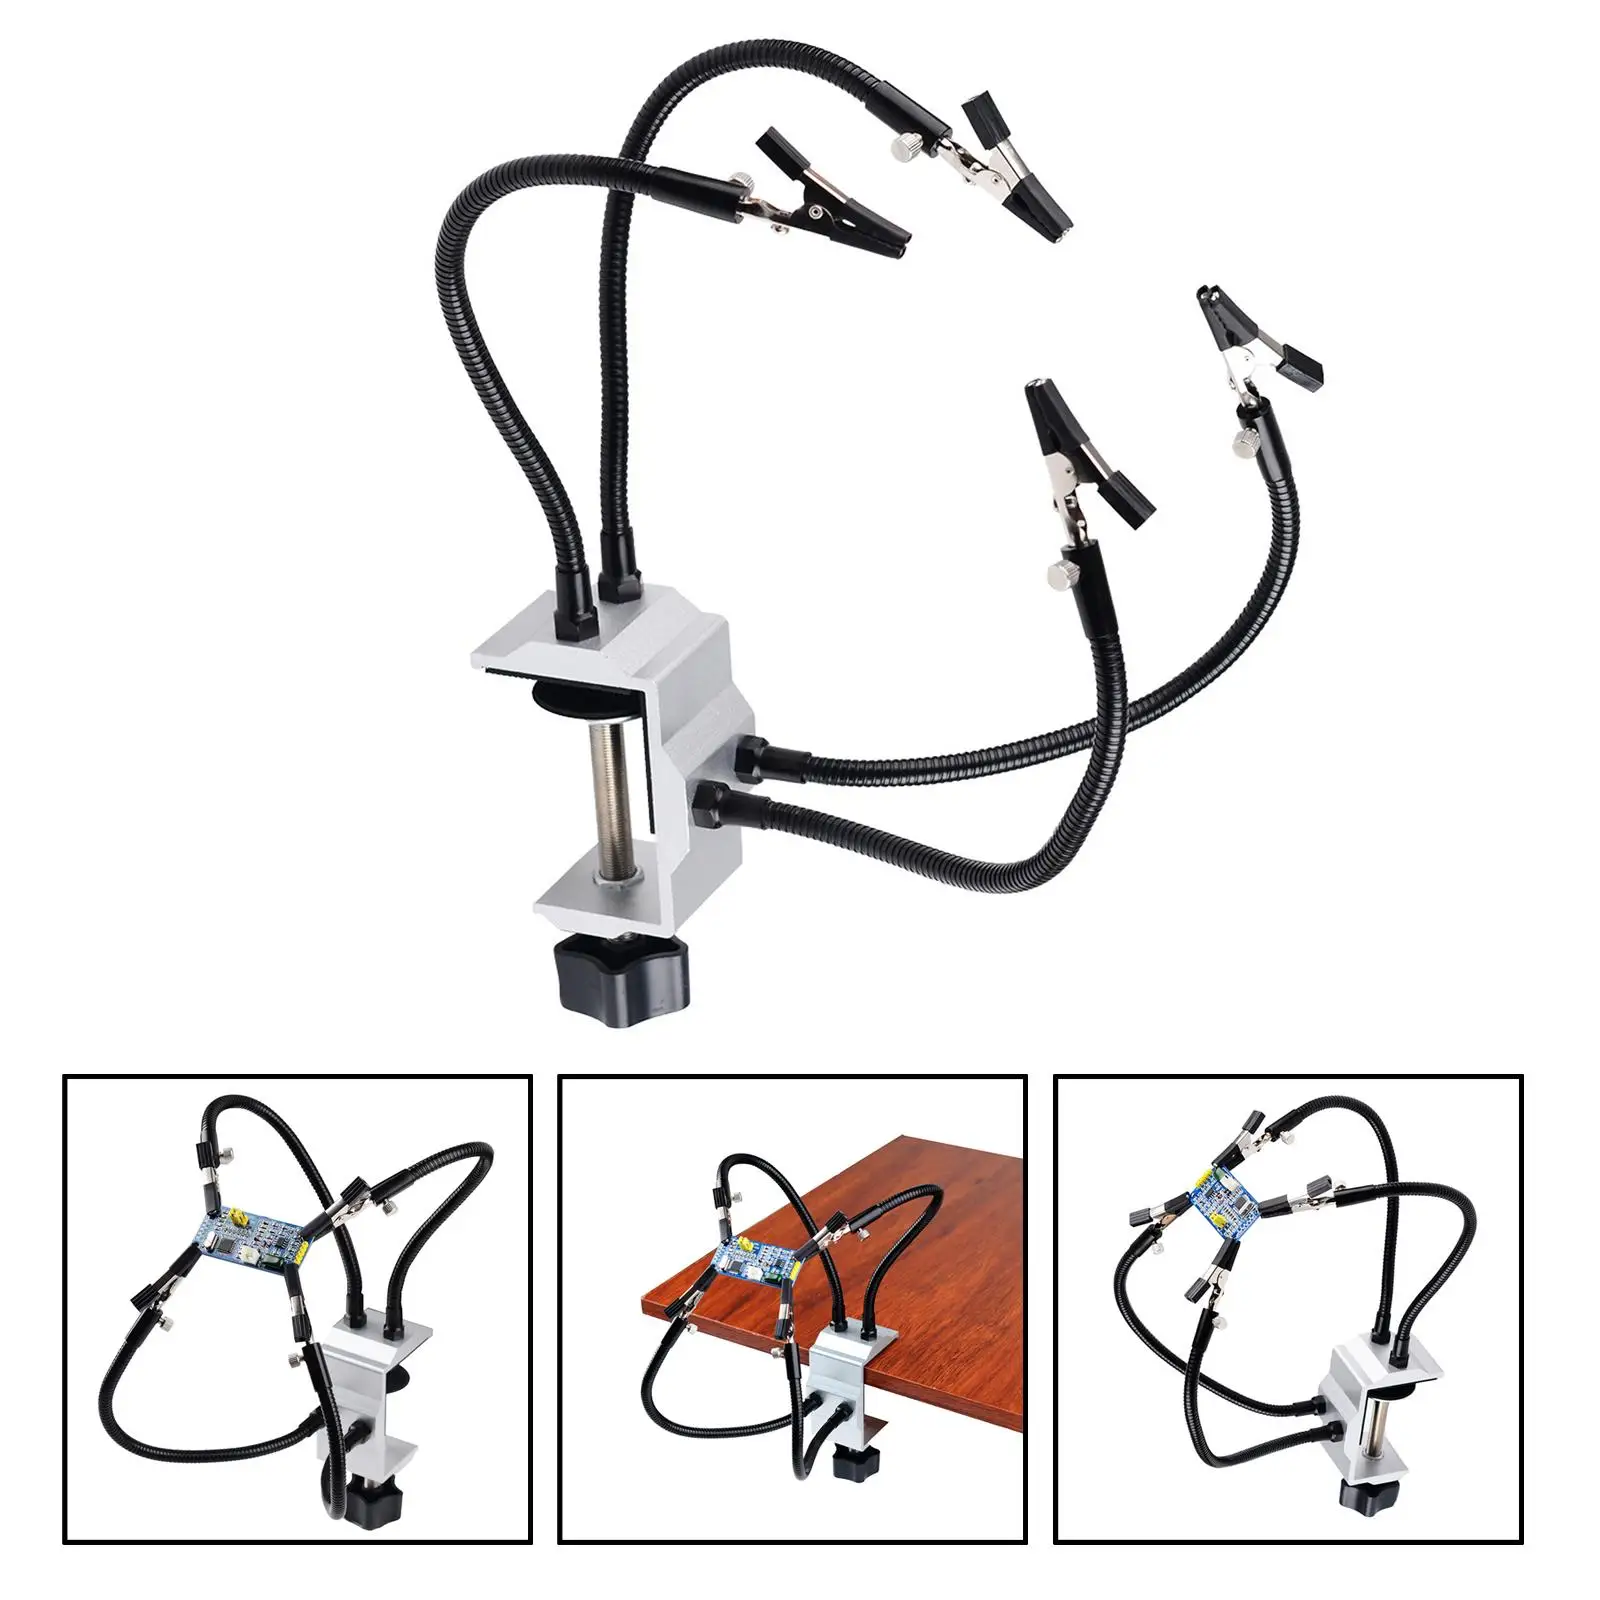 Soldering Third Hand Tools Tabletop Clamp Base Welding Helping Hands for Repairing Jewelry Arts Craft Assembly Helping Tool Kit